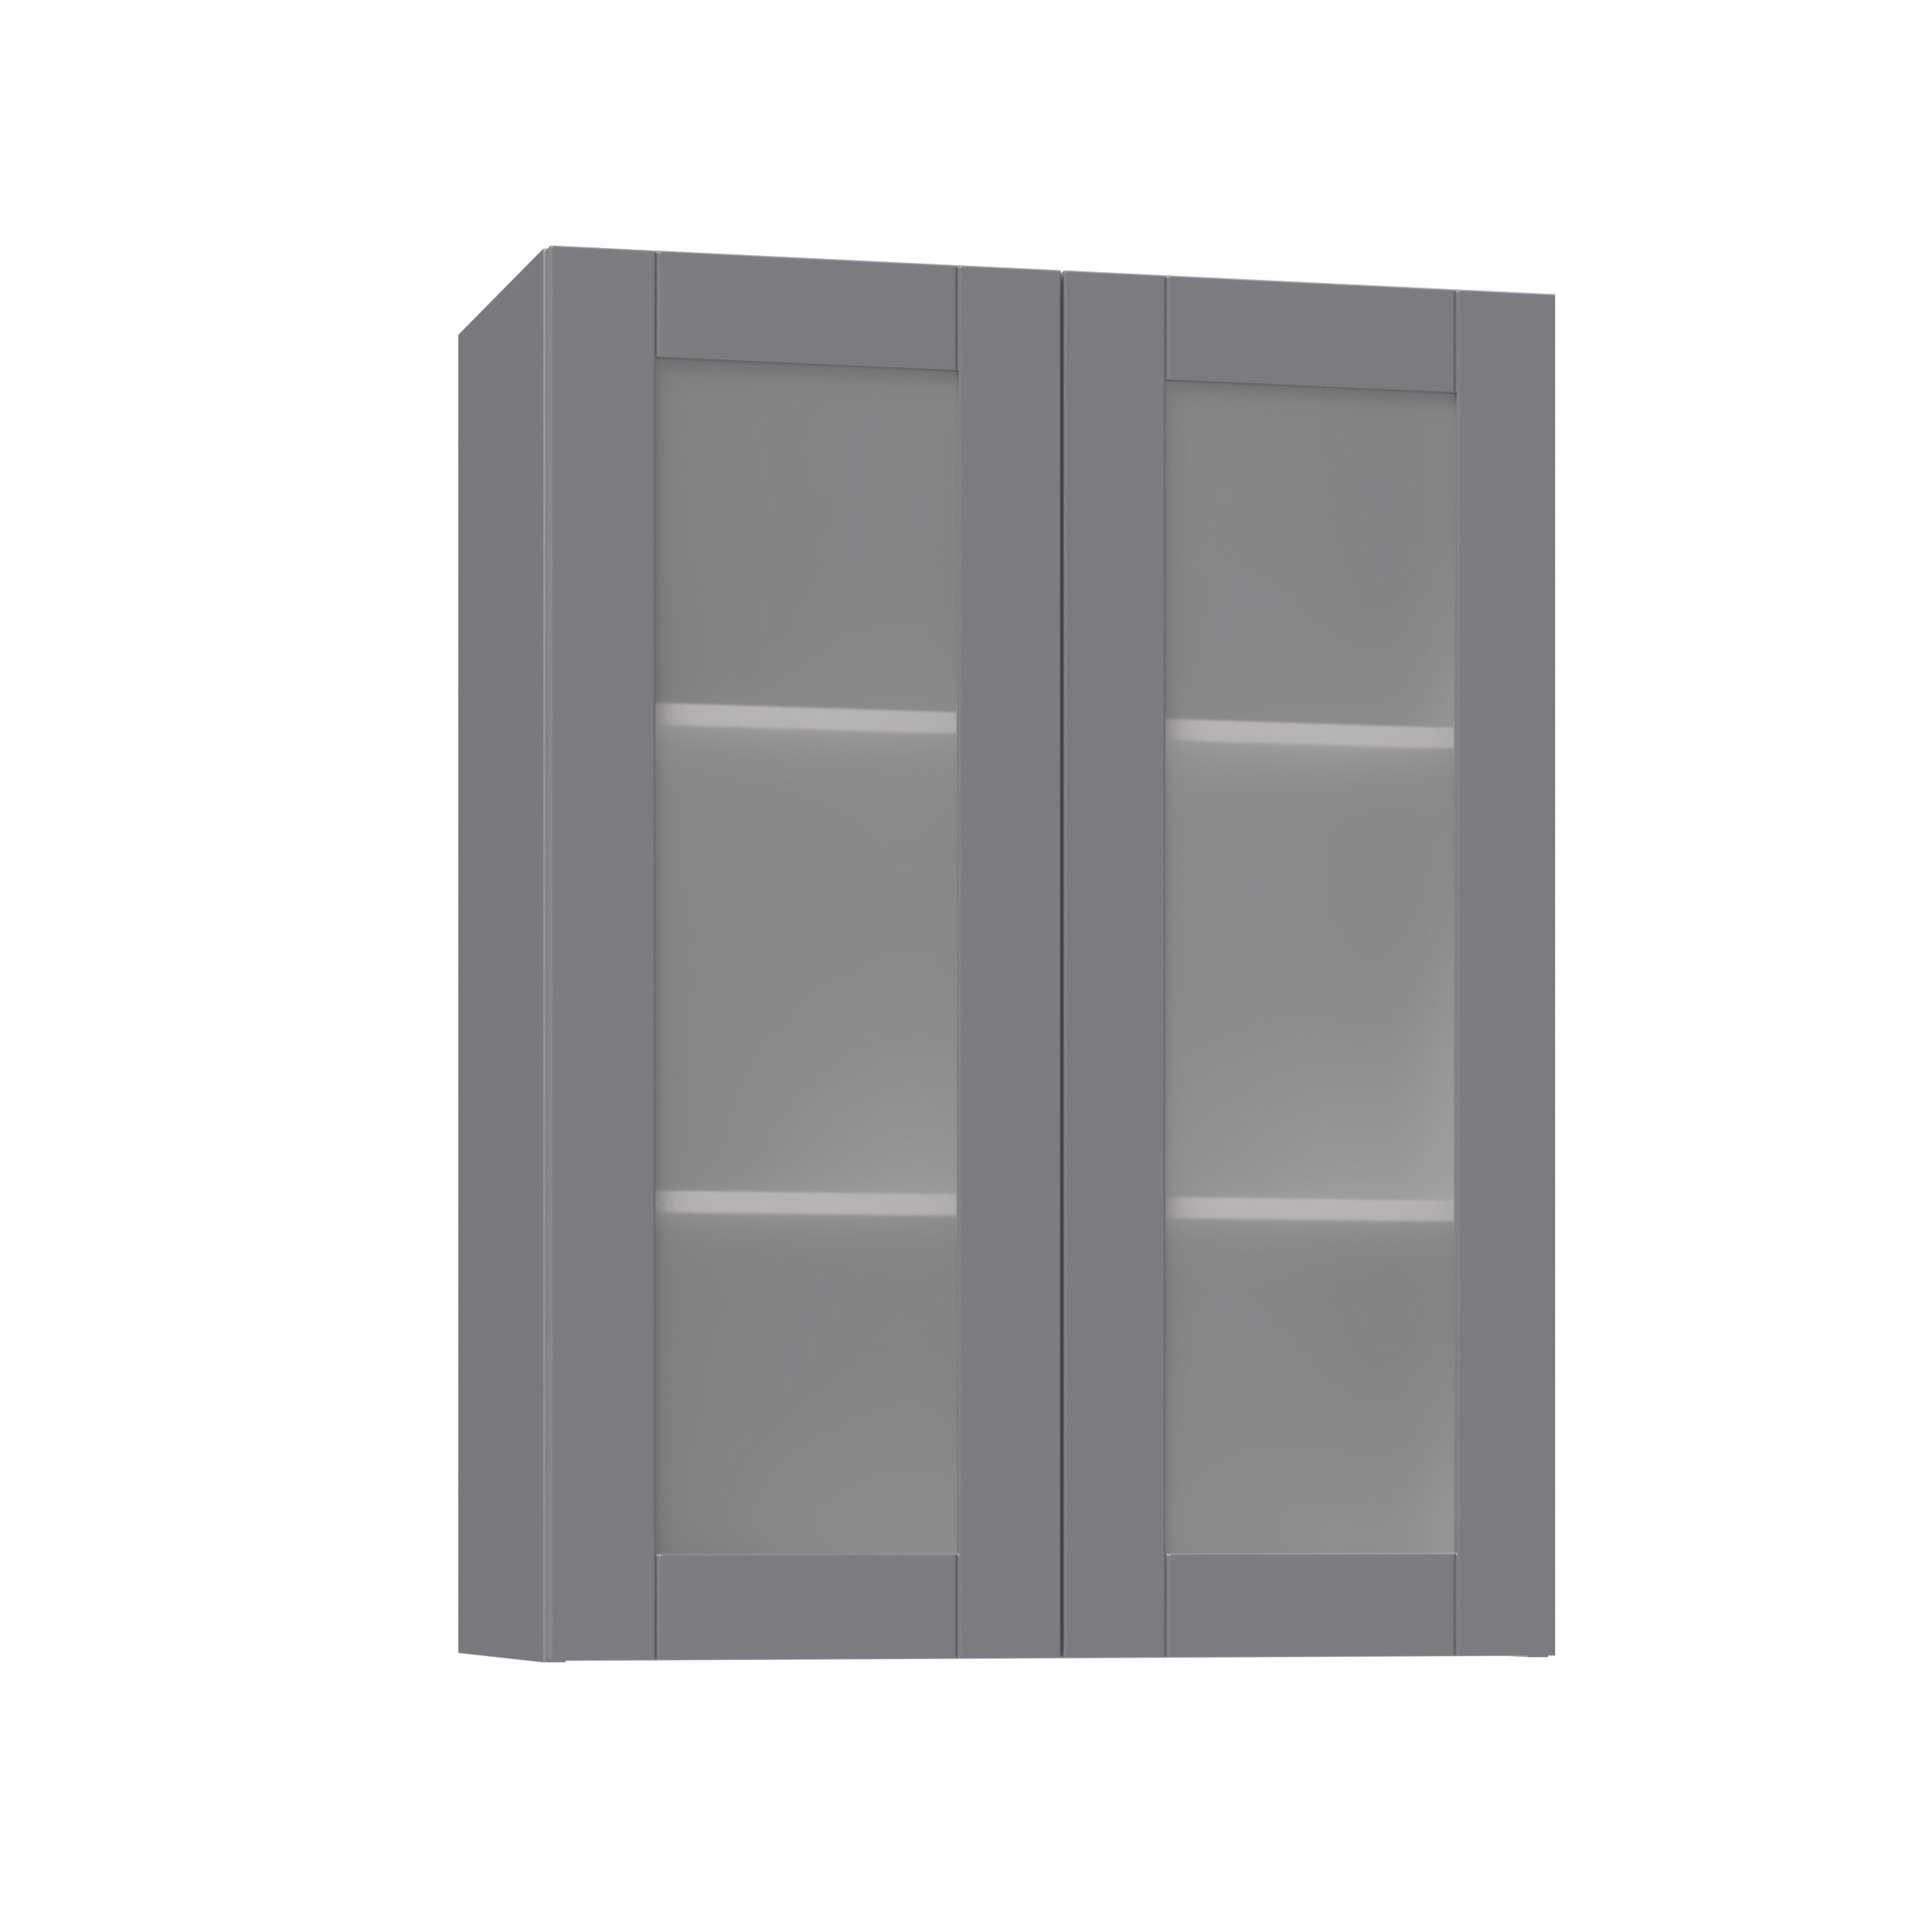 30 Wall Cabinet 40 High With 2 Glass Door And Glass Shelf J Collection